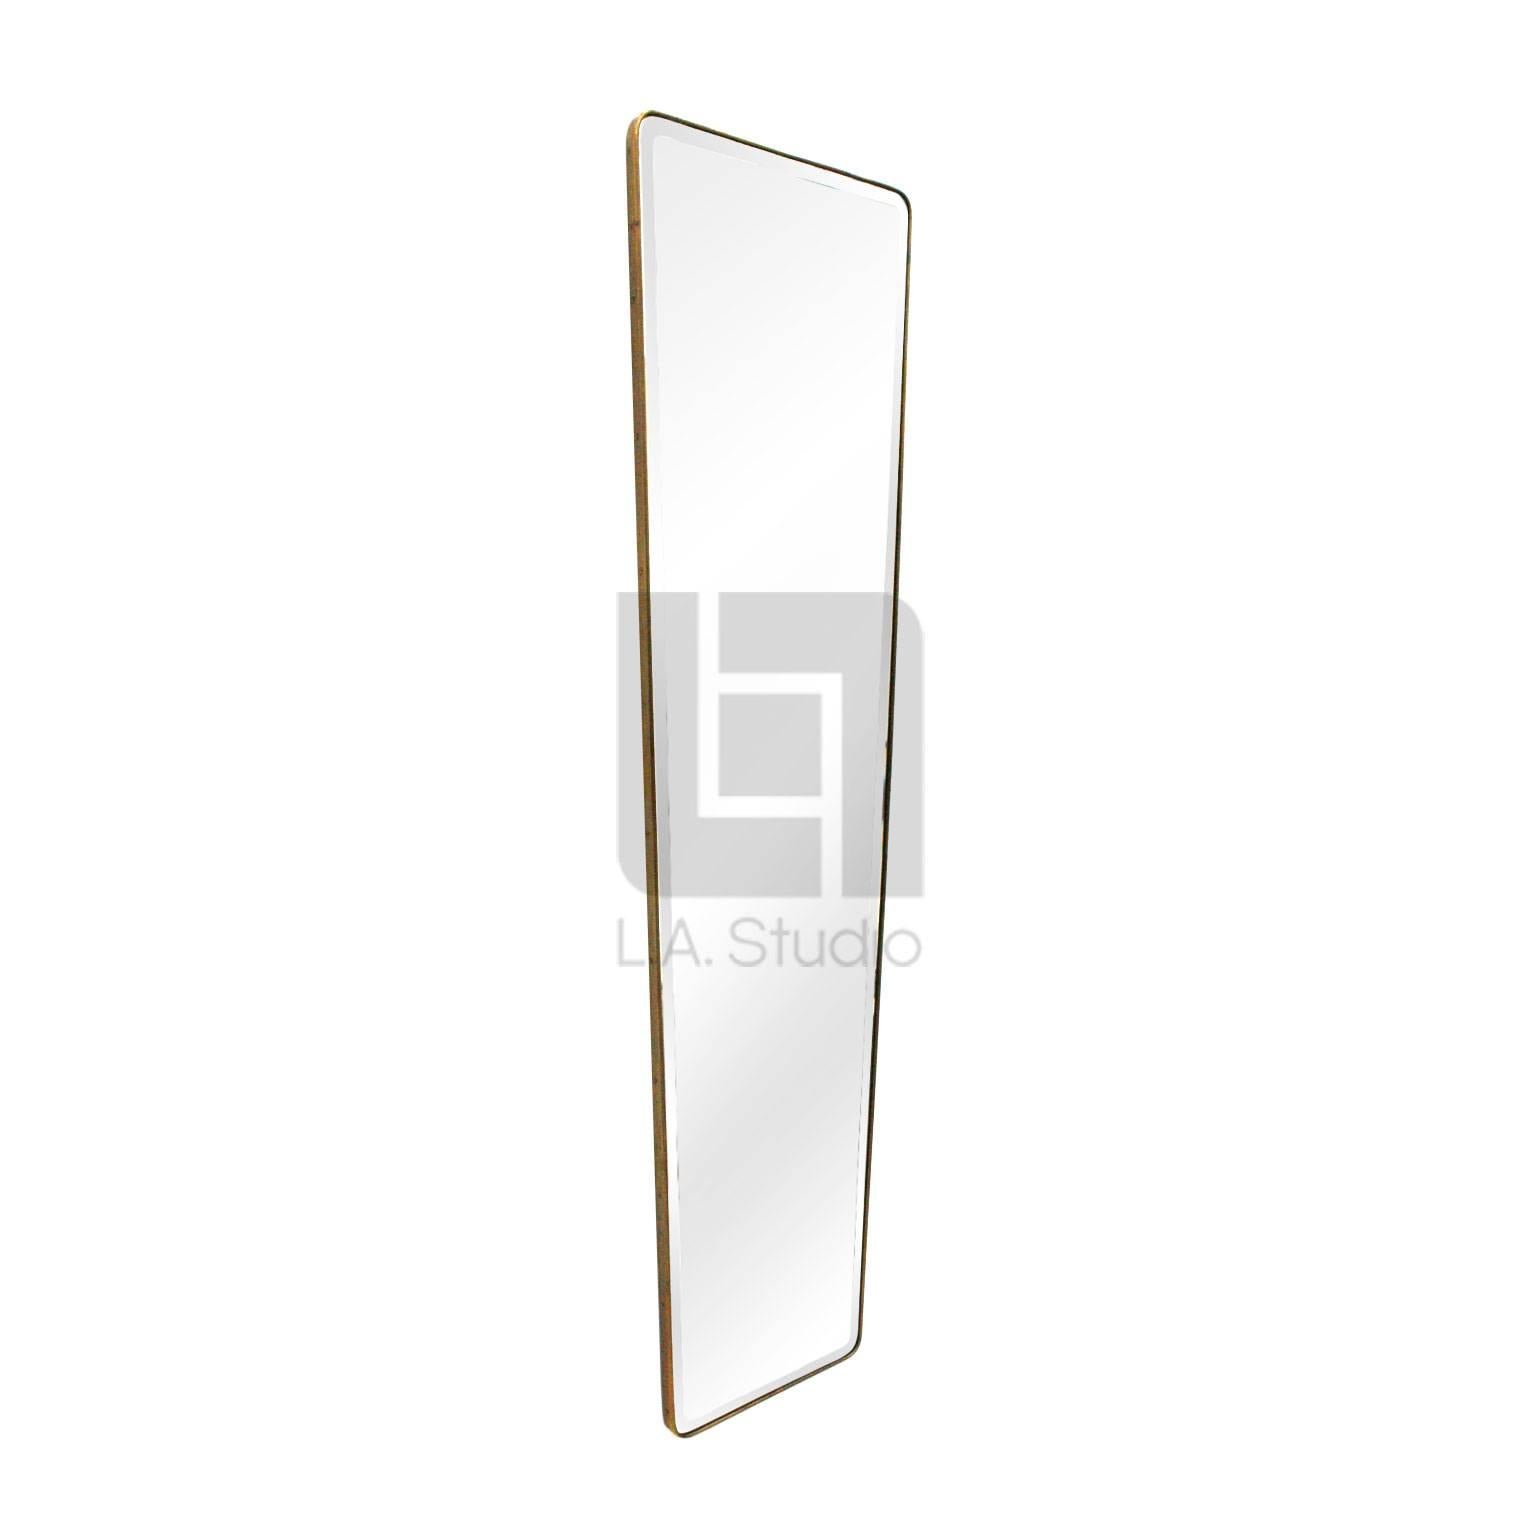 Set of three mirrors attributed to Gio Ponti with brass profiles. The mirrored glass it's original of the period.